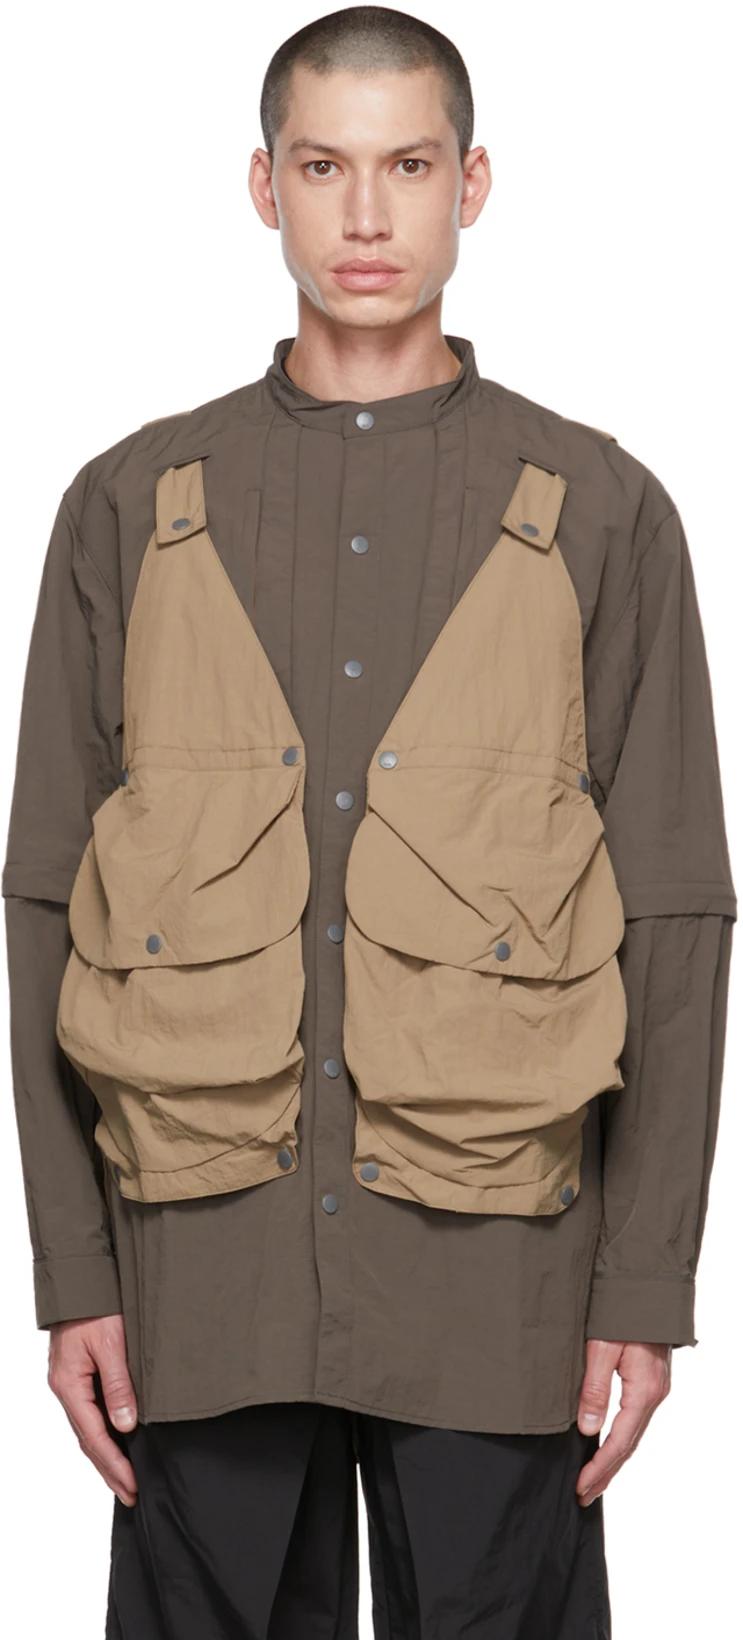 Taupe & Beige 'Vest Shirt' 1.0 Jacket by ARCHIVAL REINVENT